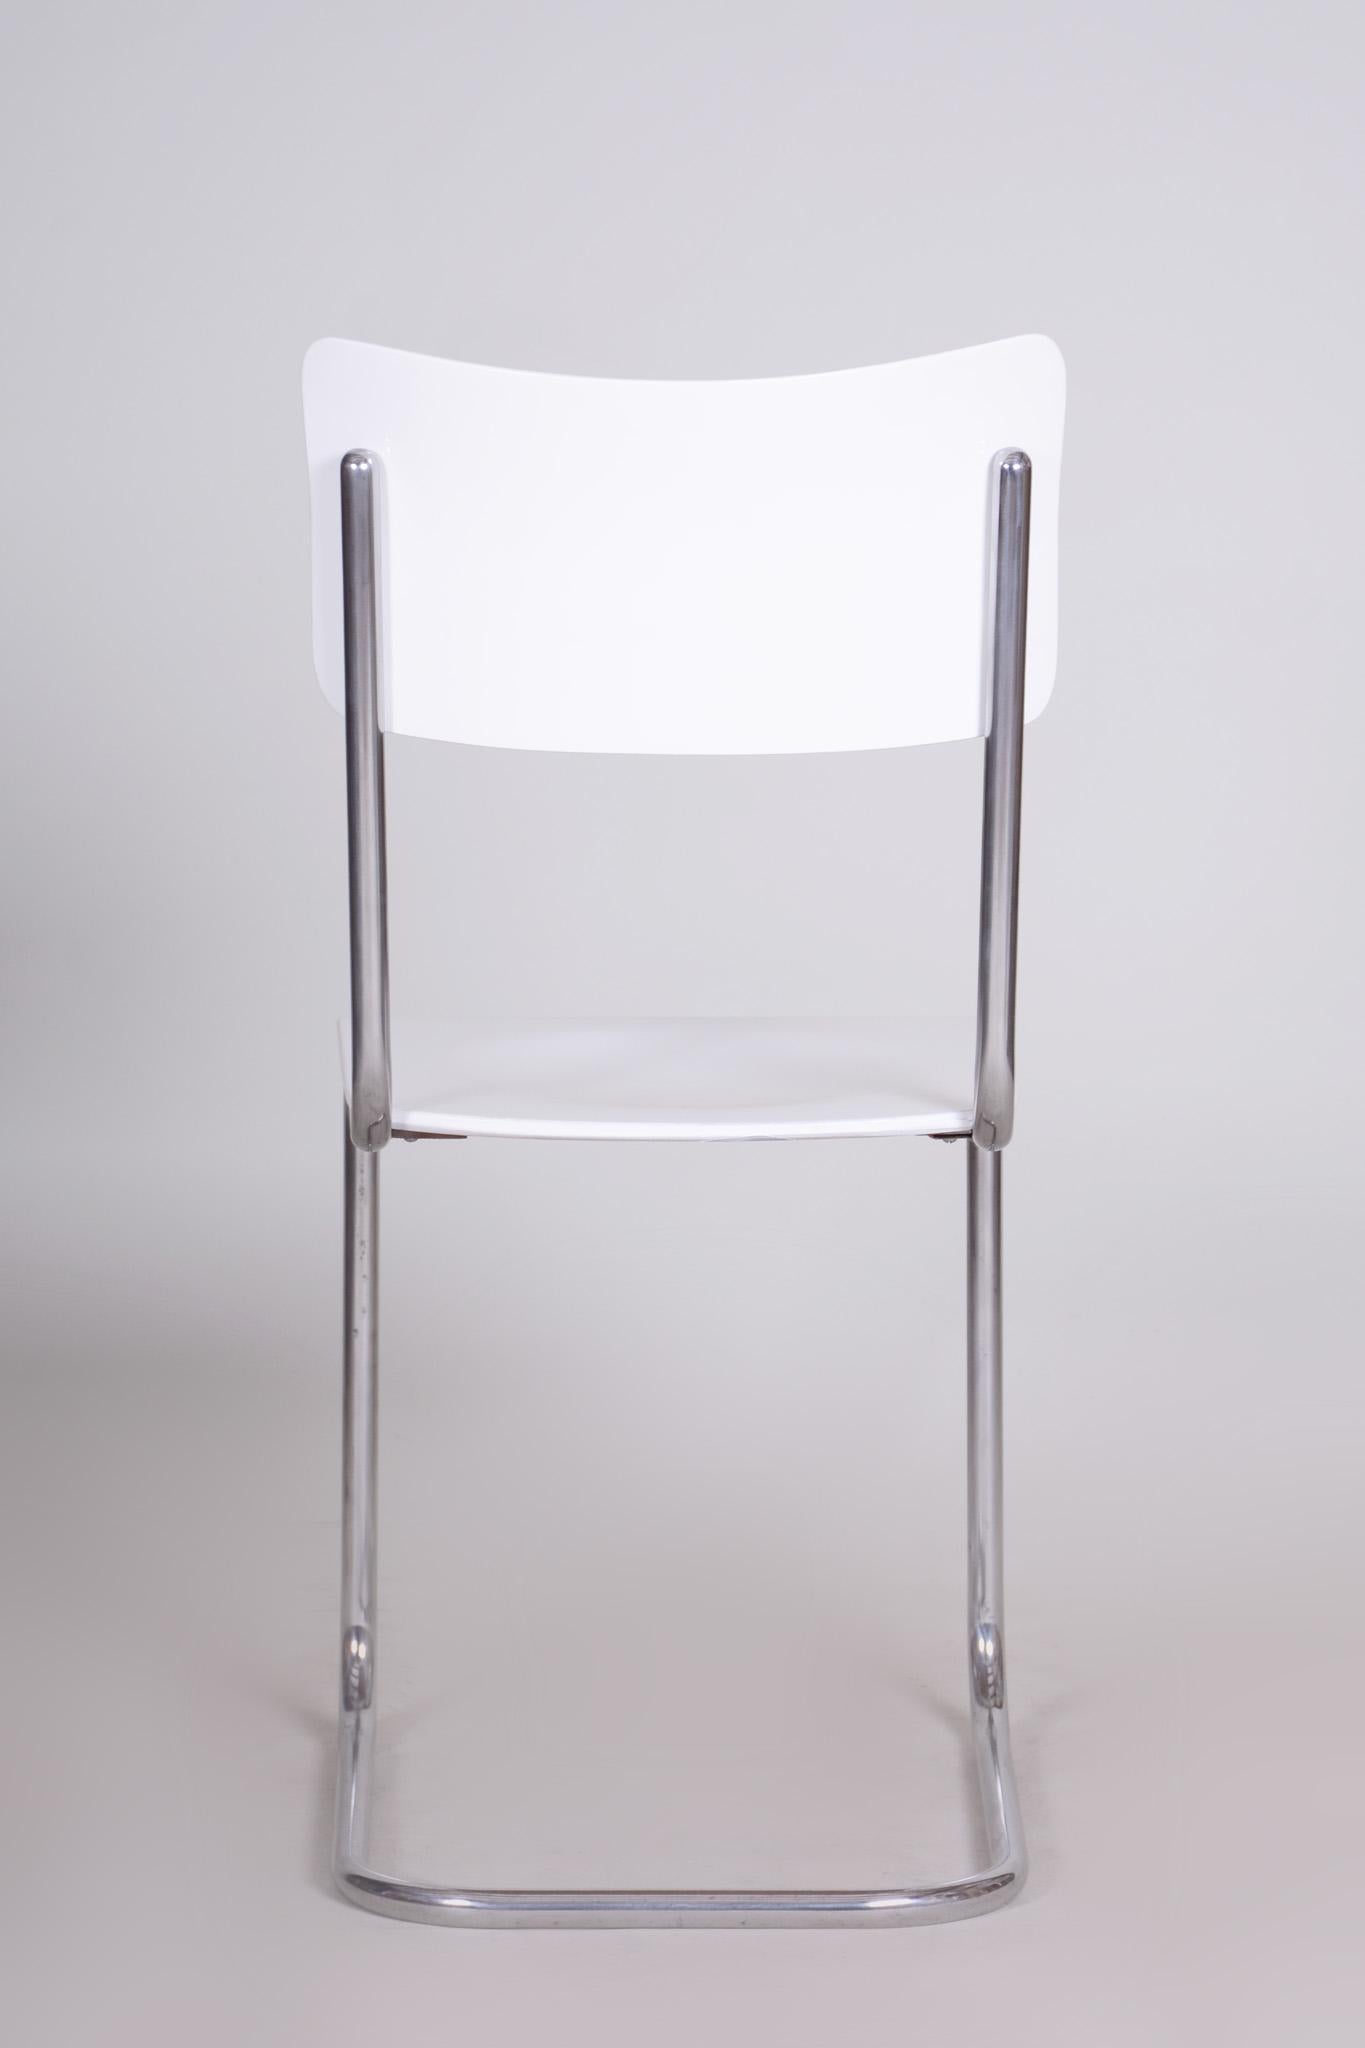 Mid-20th Century Restored White Vintage Bauhaus Chair Manufactured by Vichr a Spol, 1930-1939 For Sale